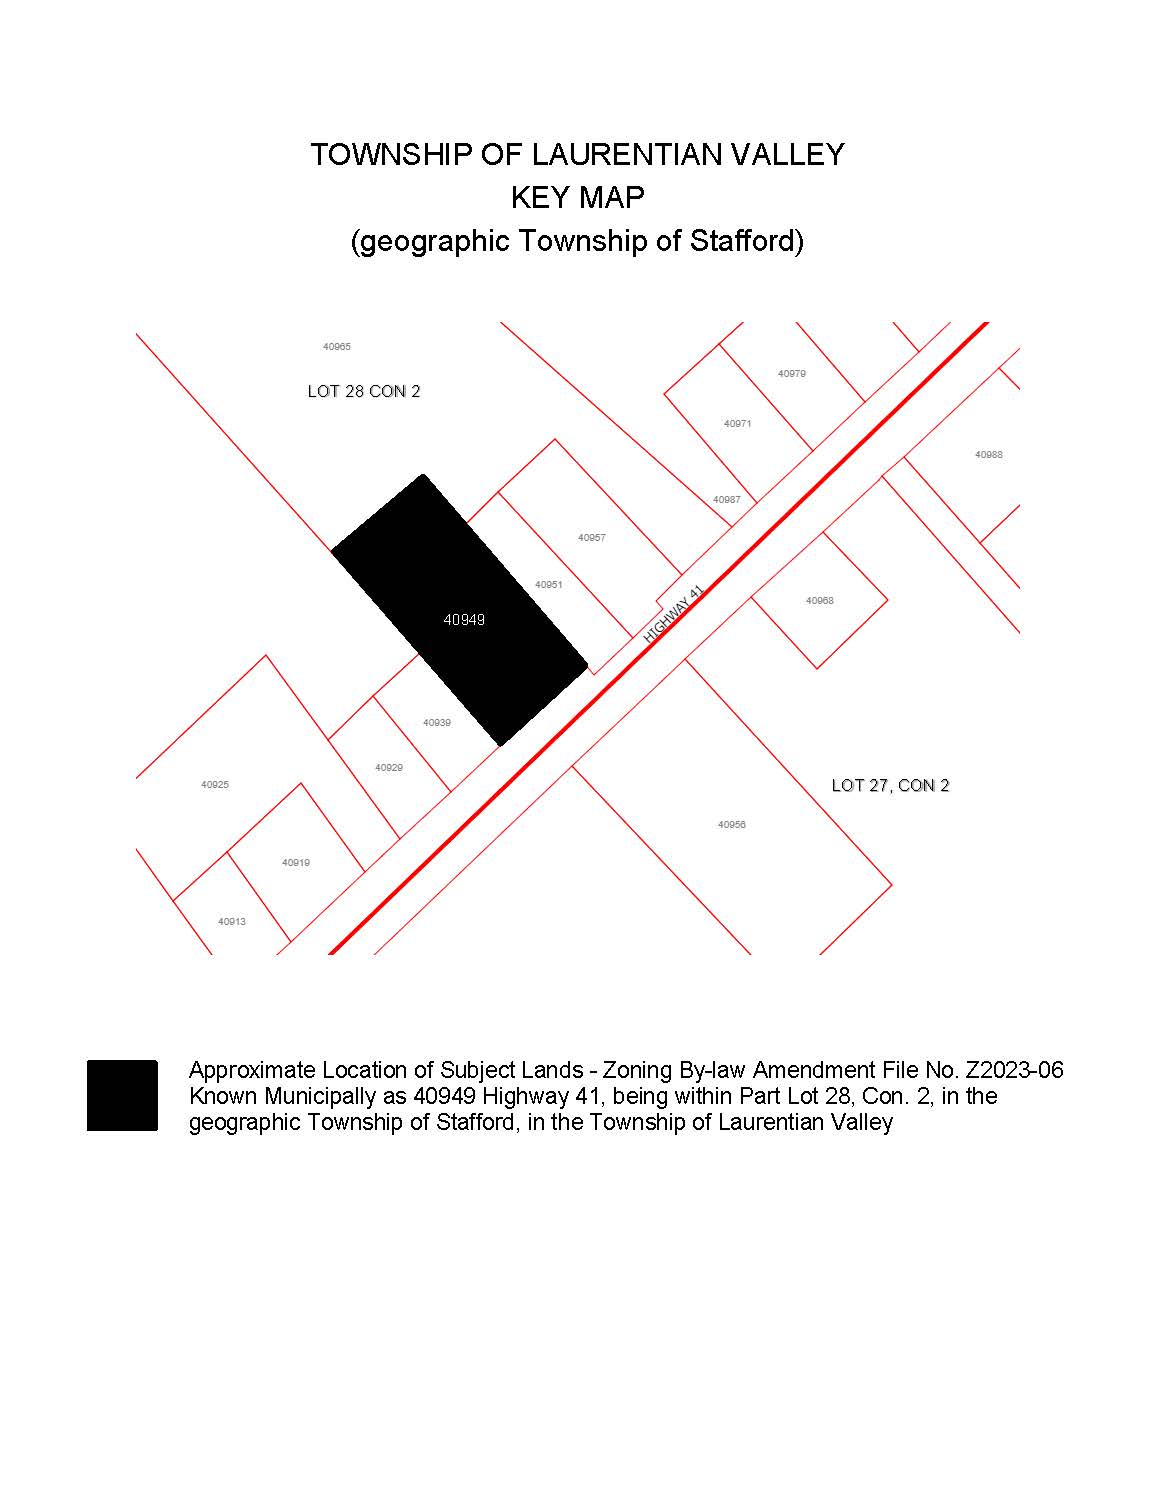 Image of key map showing subject property for file Z2023 06.